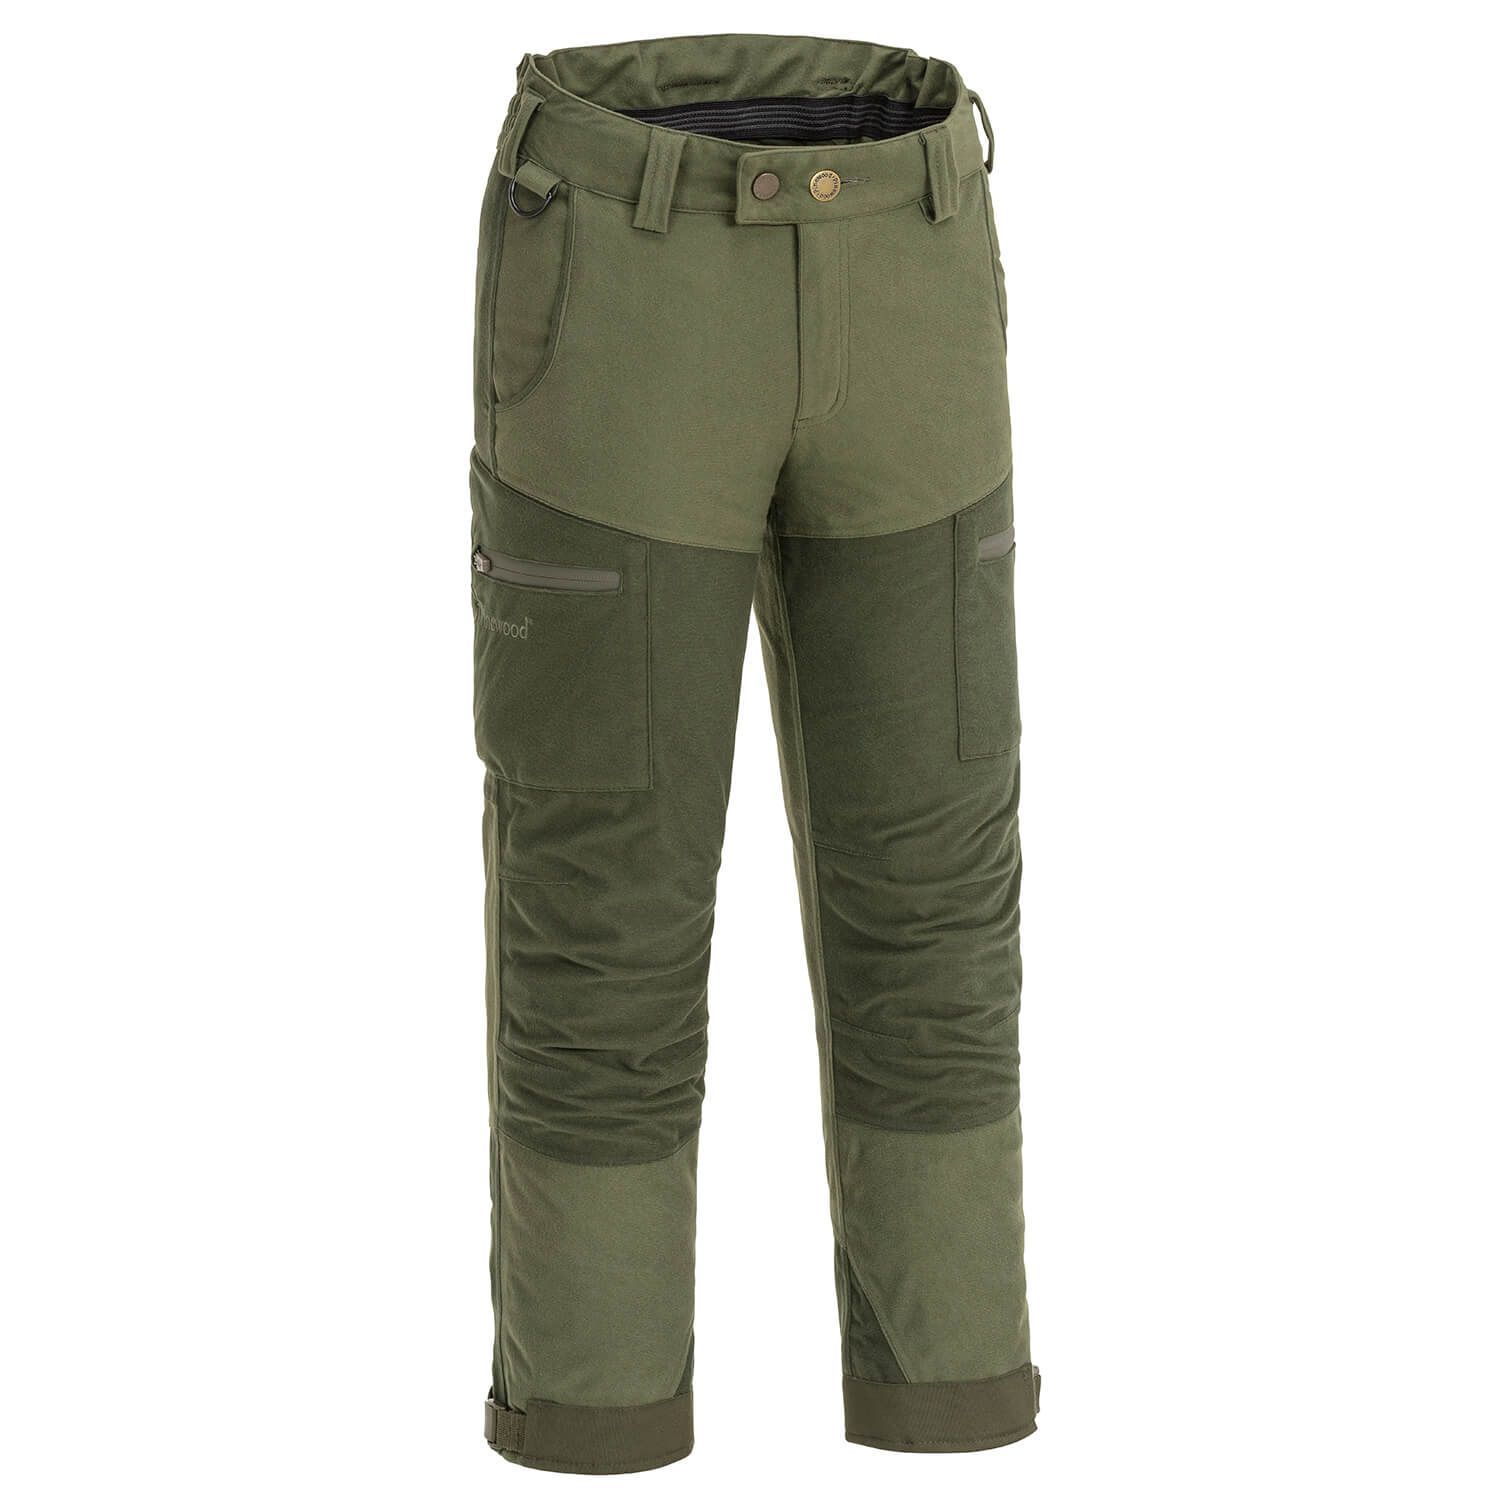 Pinewood Trousers kids Retriever Active (green) - Kids' Clothing